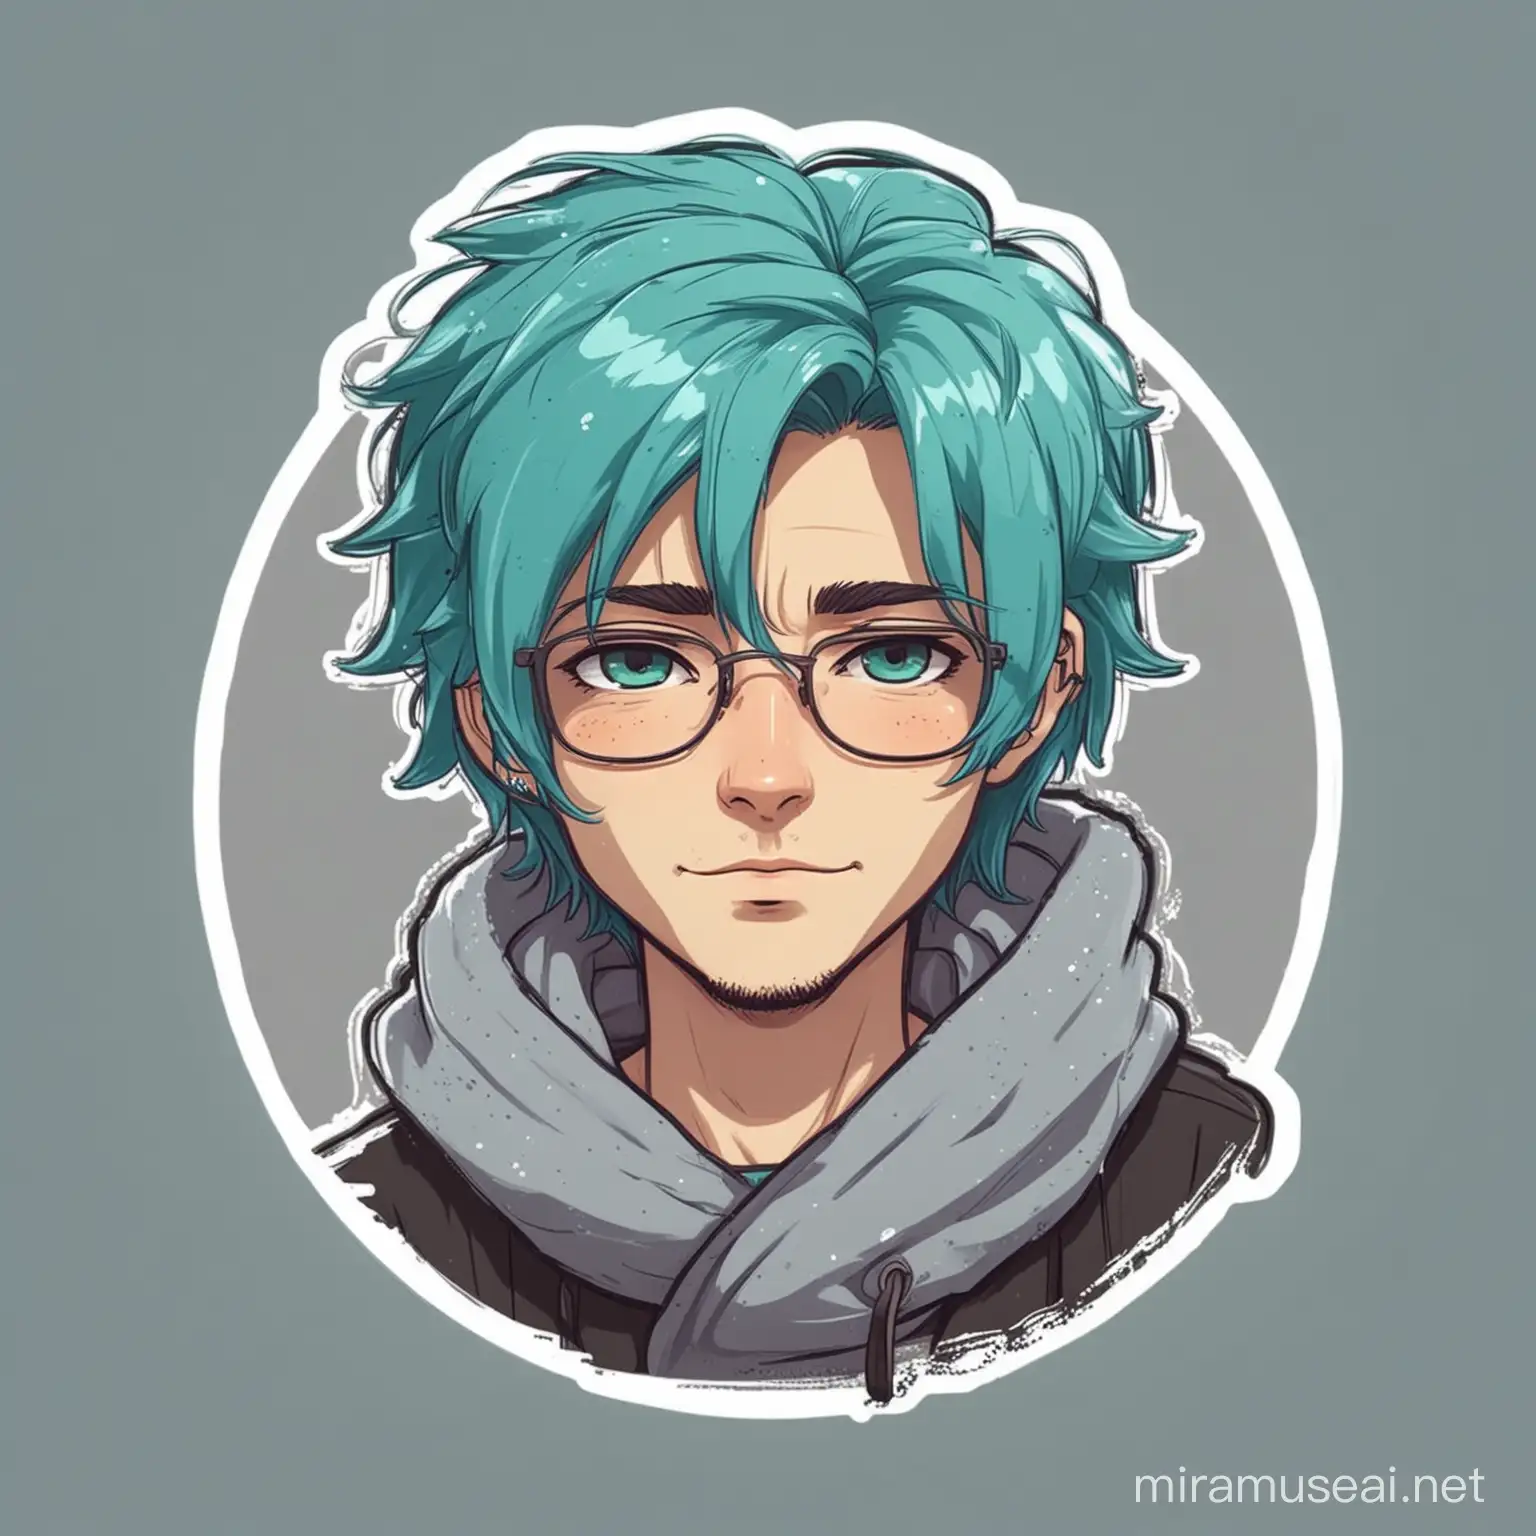 Cozy Cartoon Man with High Detail and Teal Hair